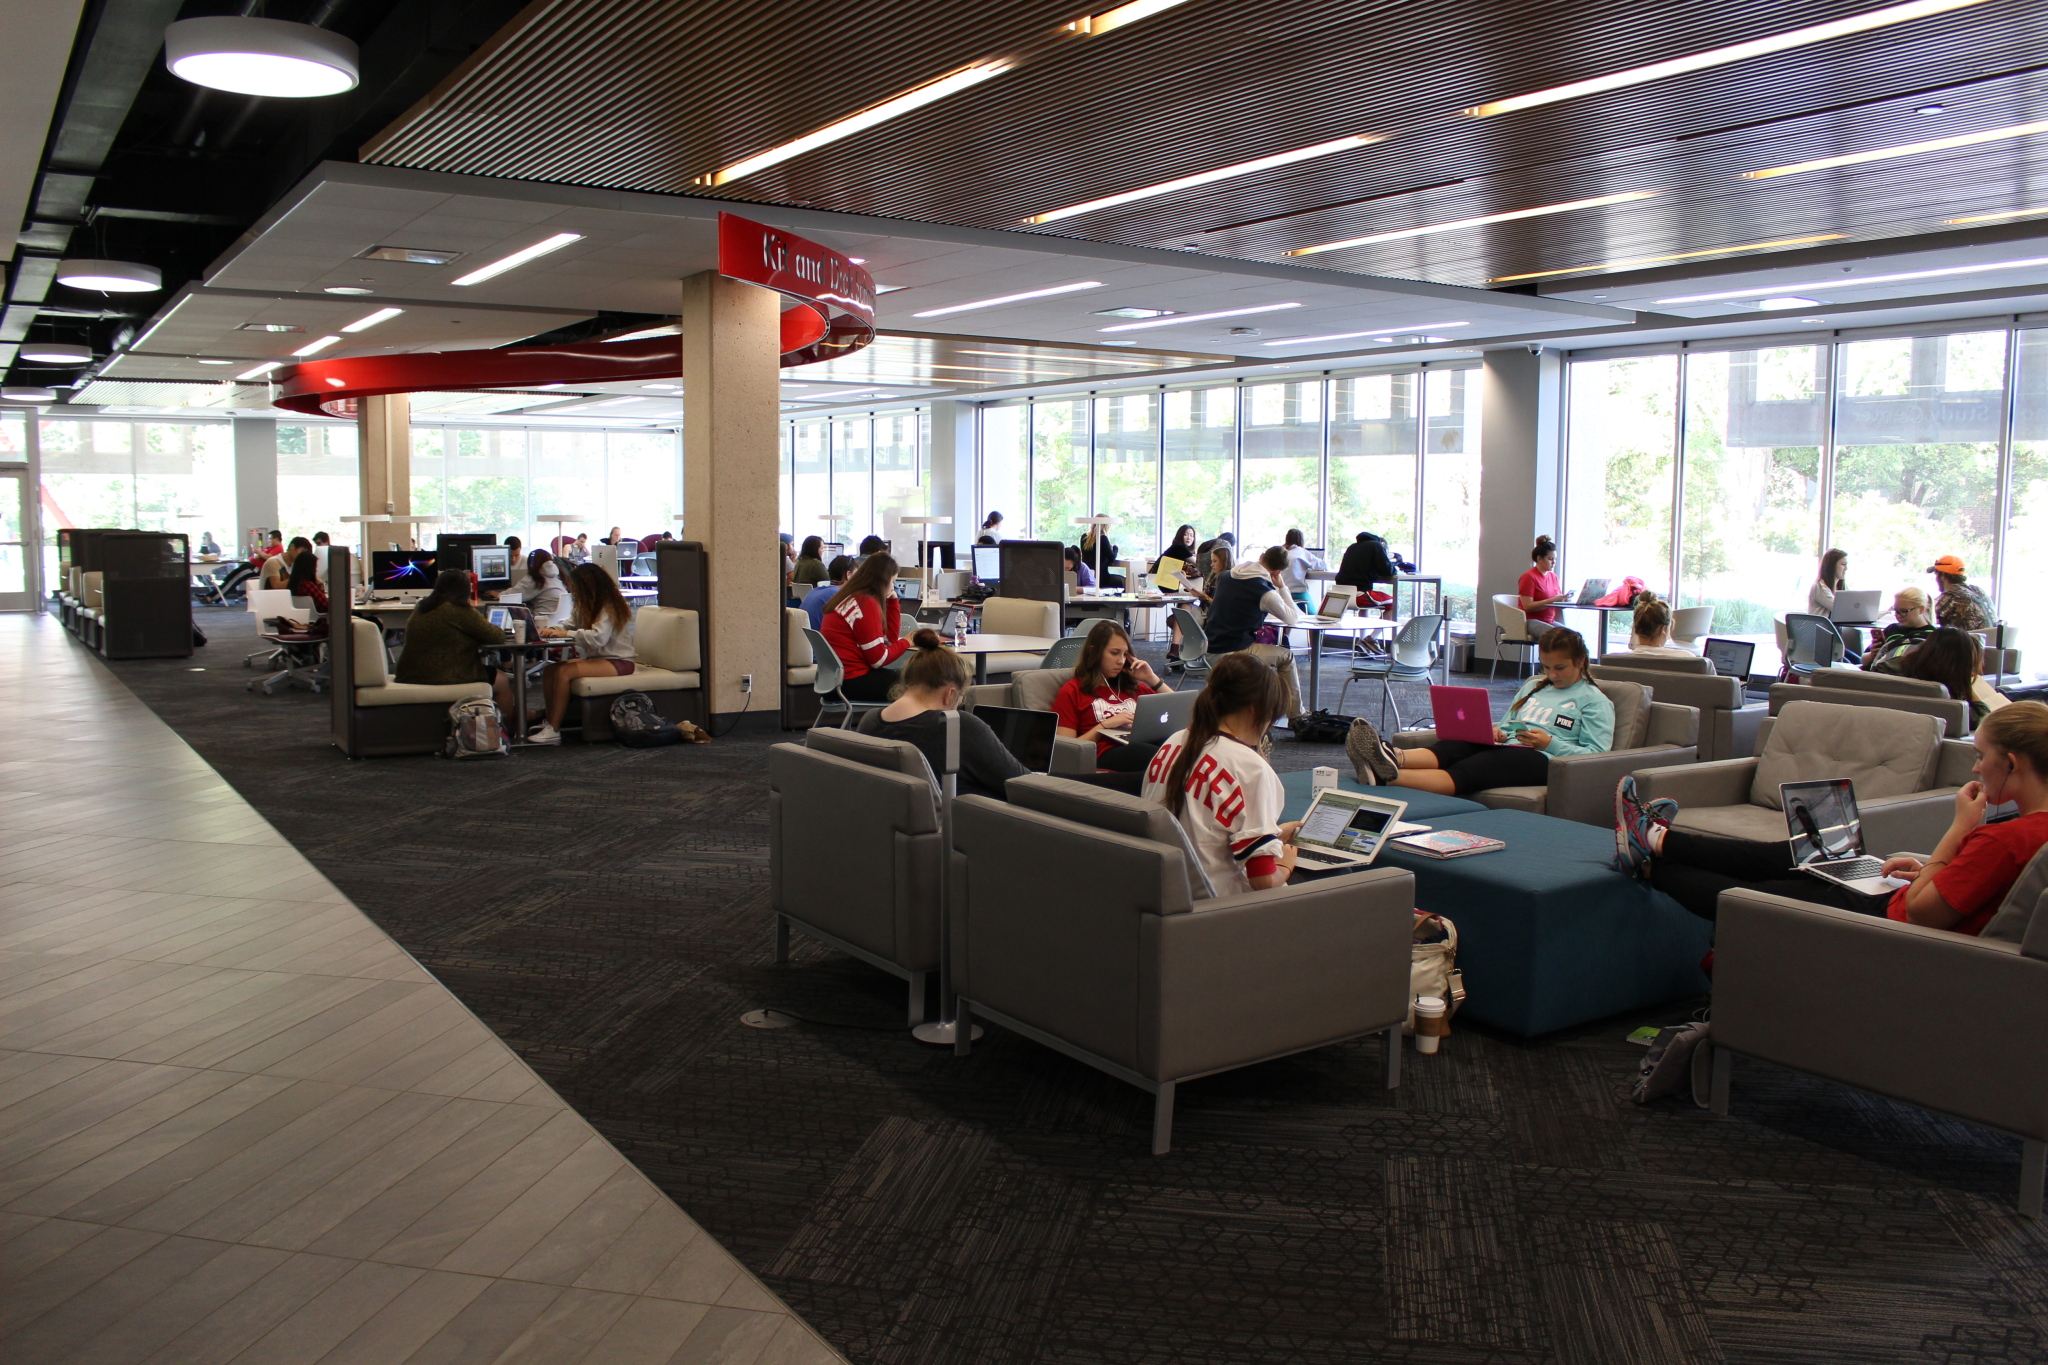 Adele Coryell Hall Learning Commons